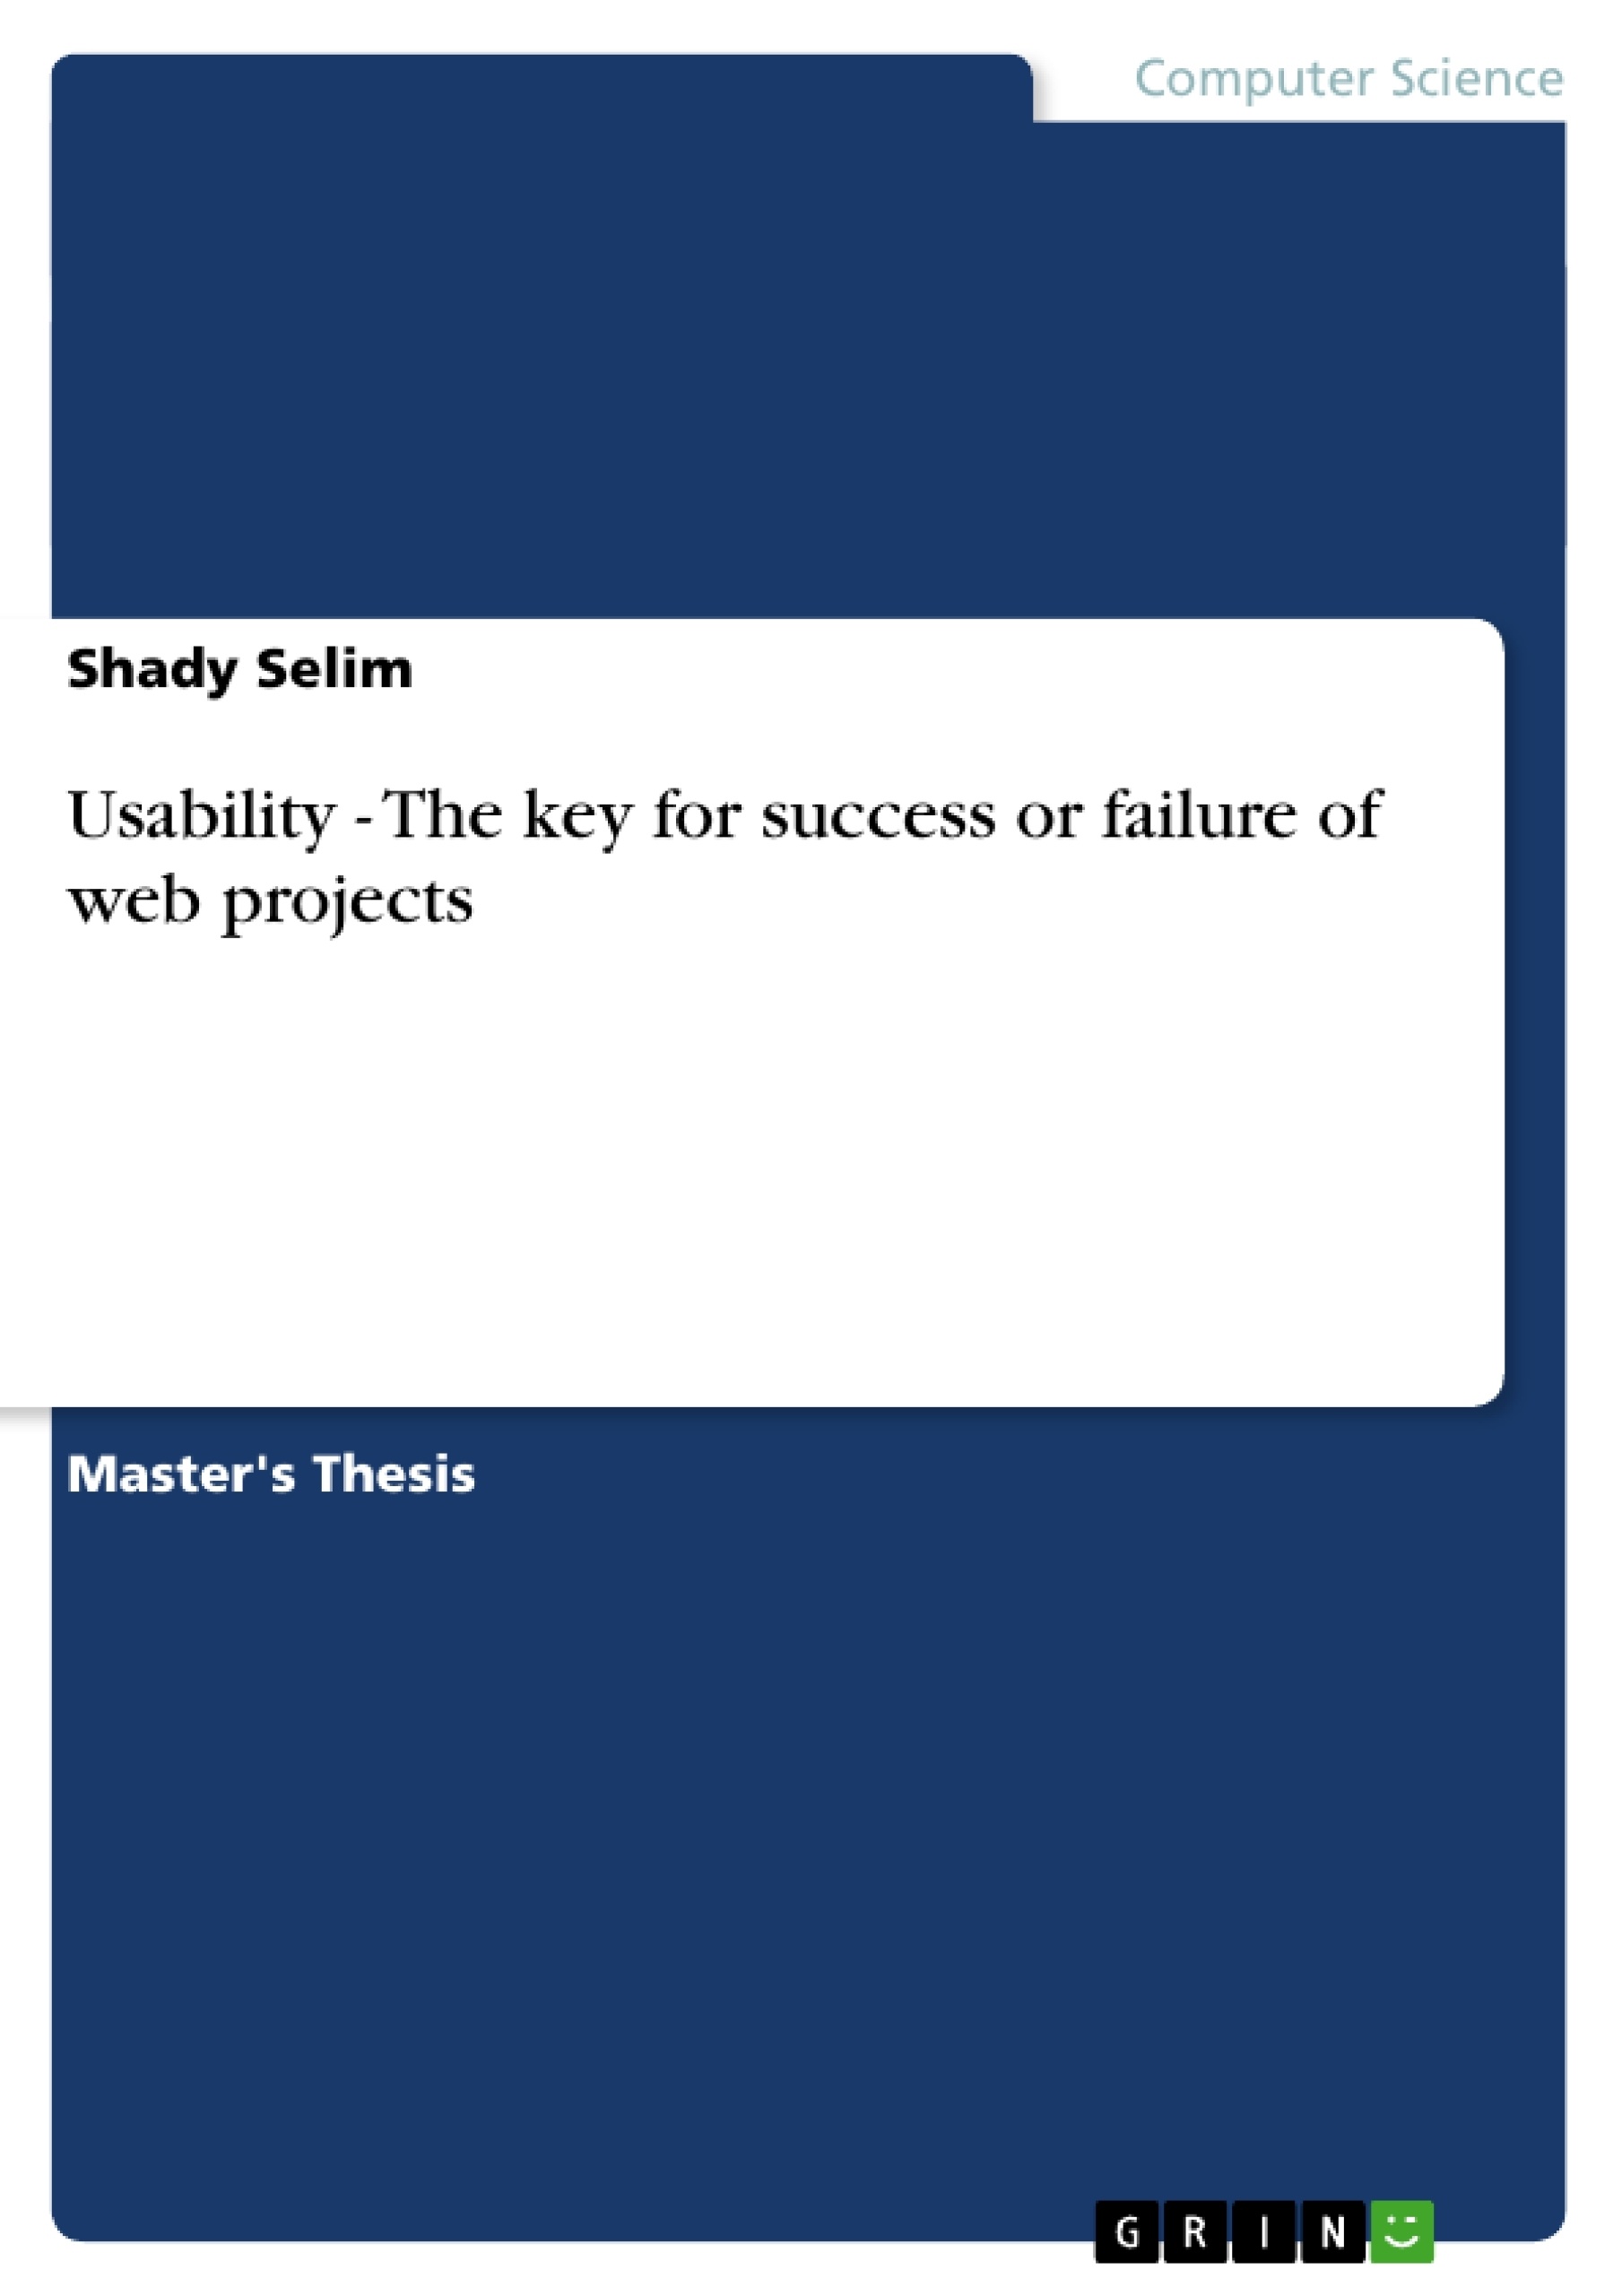 Titre: Usability - The key for success or failure of web projects